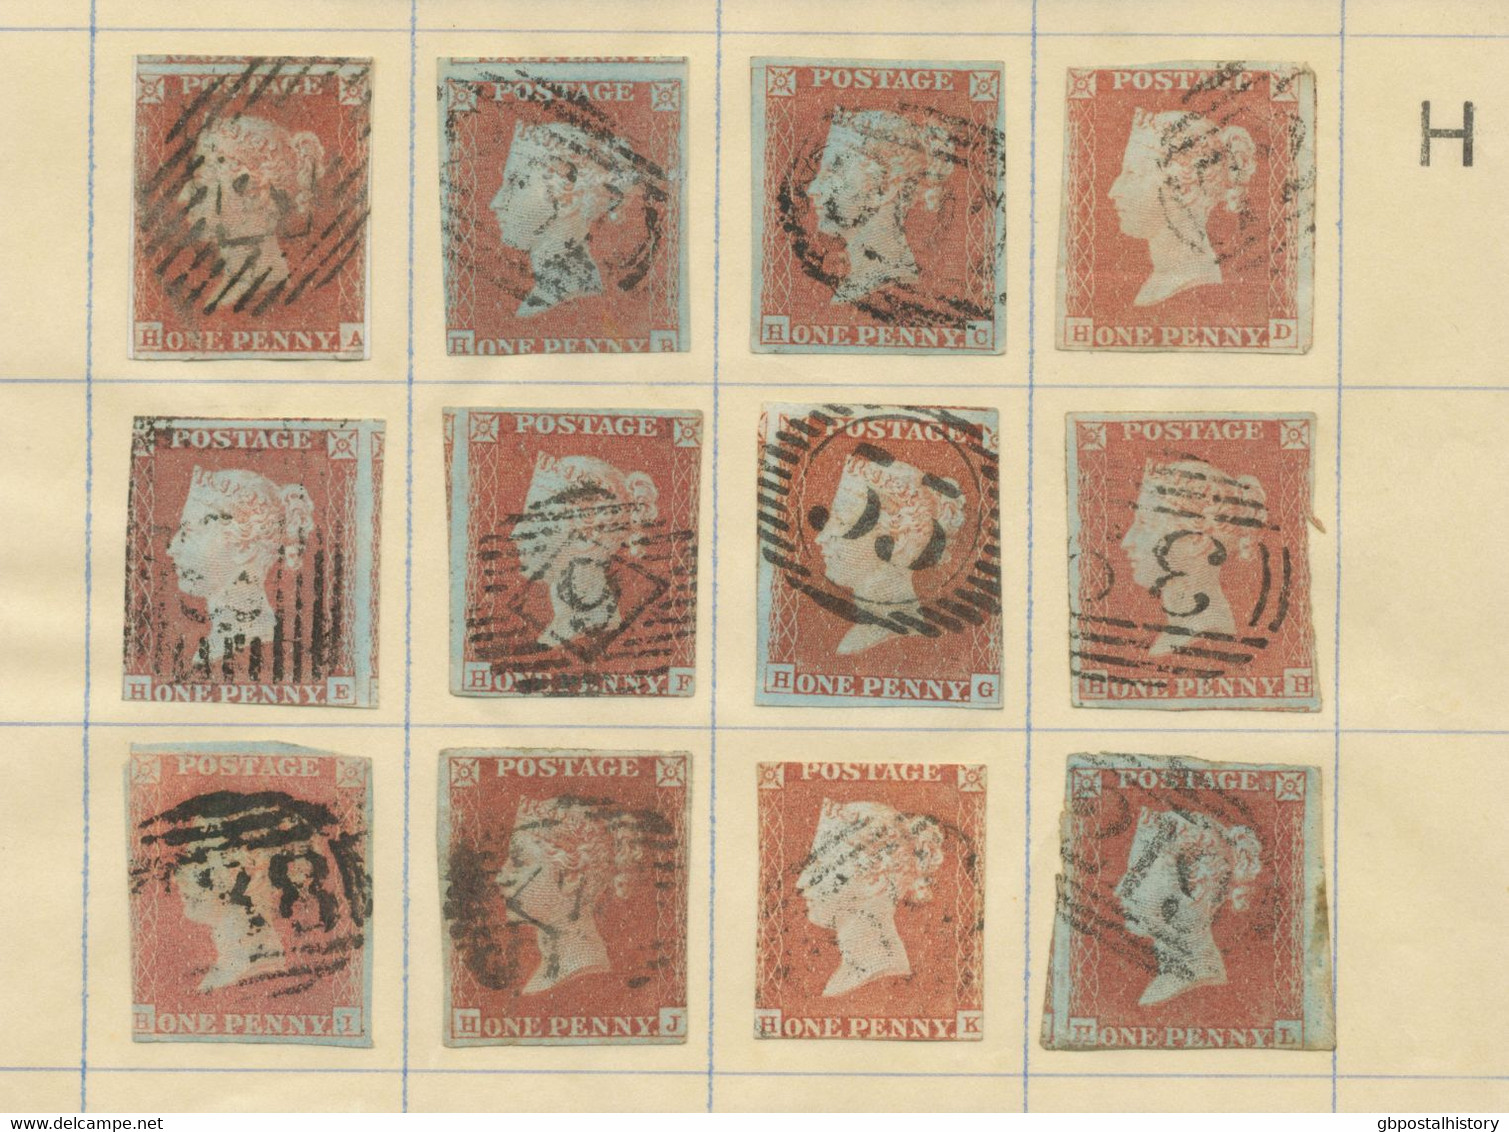 COLLECTION QV 1d red imperforated complete sheet reconstruction of 240 stamps (within ca. 130 four margins copies)